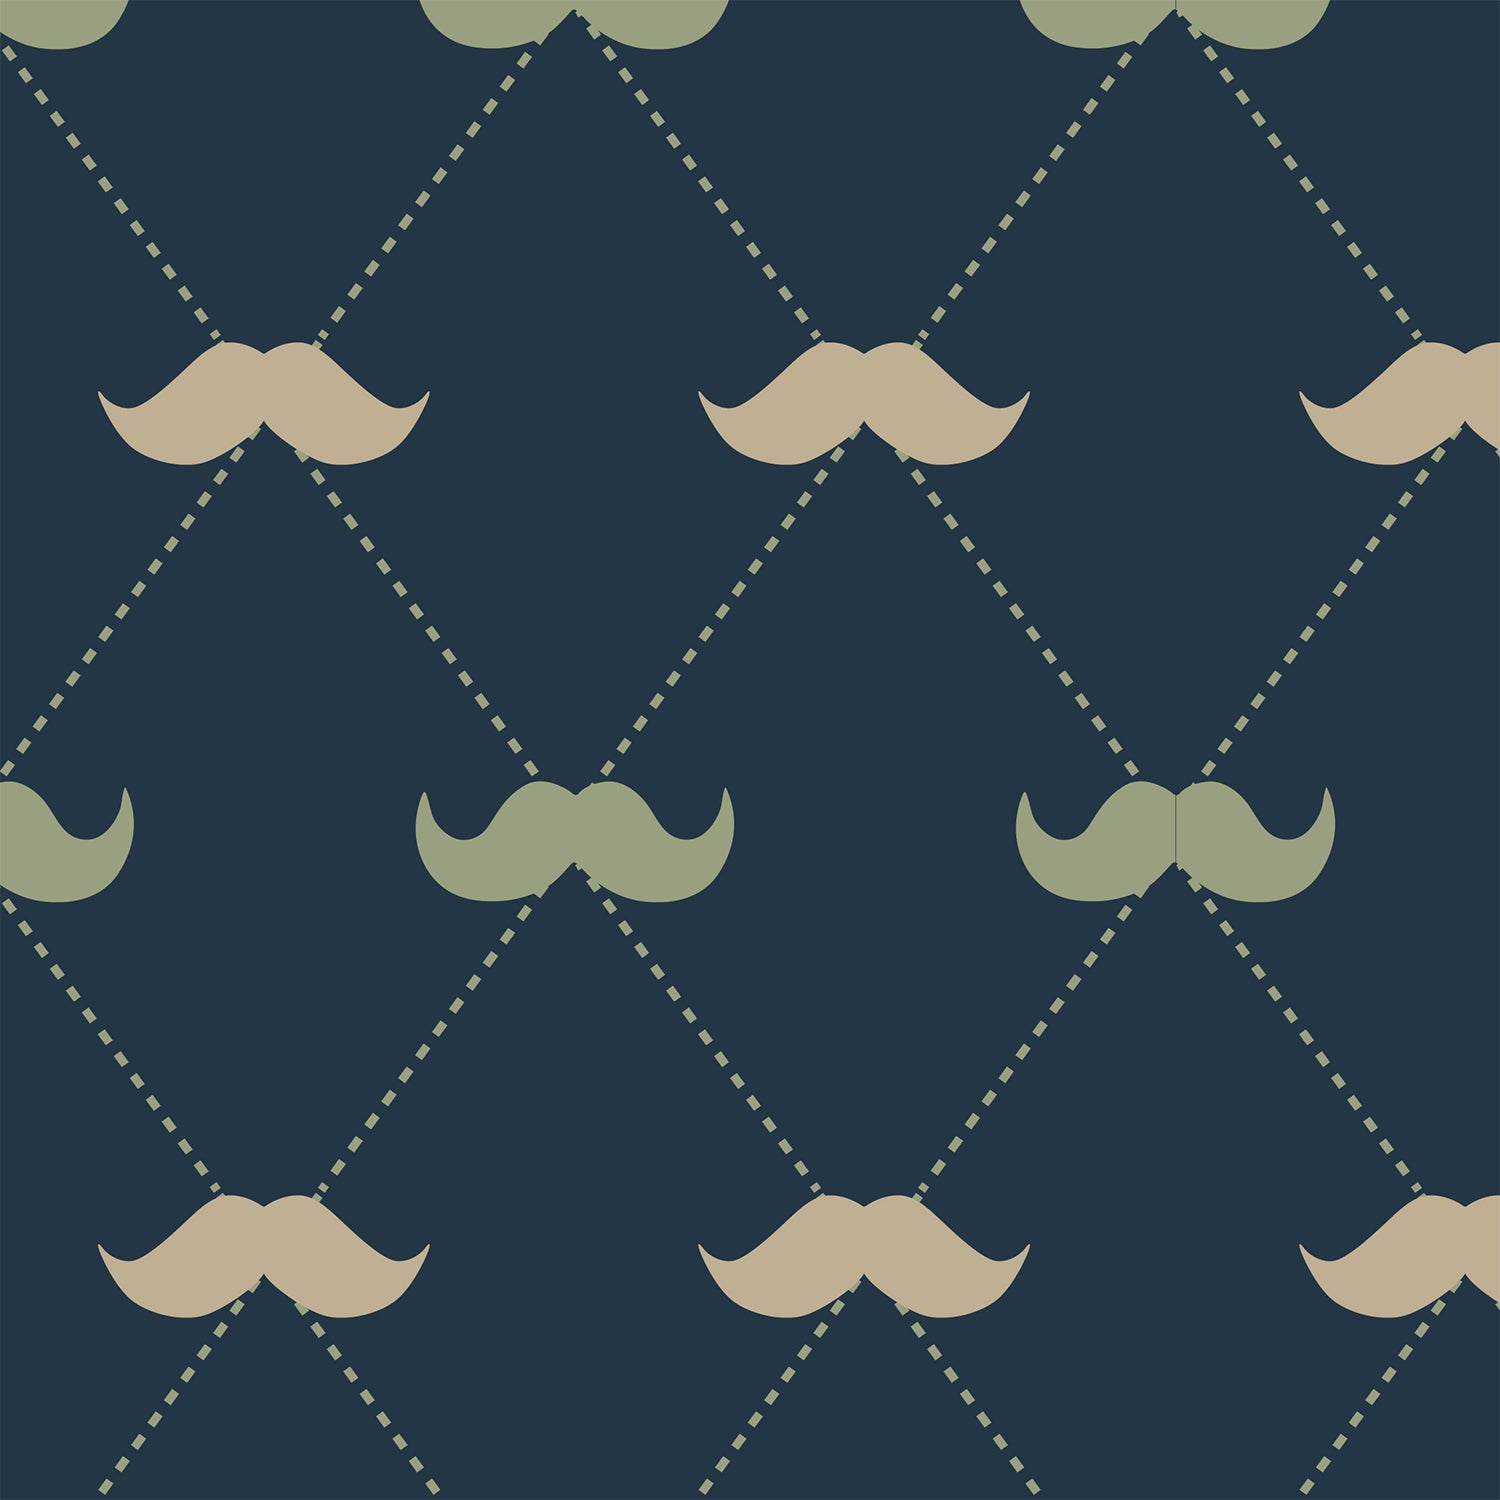 Moustache Navy Blue Flat Wrapping Paper Sheet Wholesale Wraphaholic